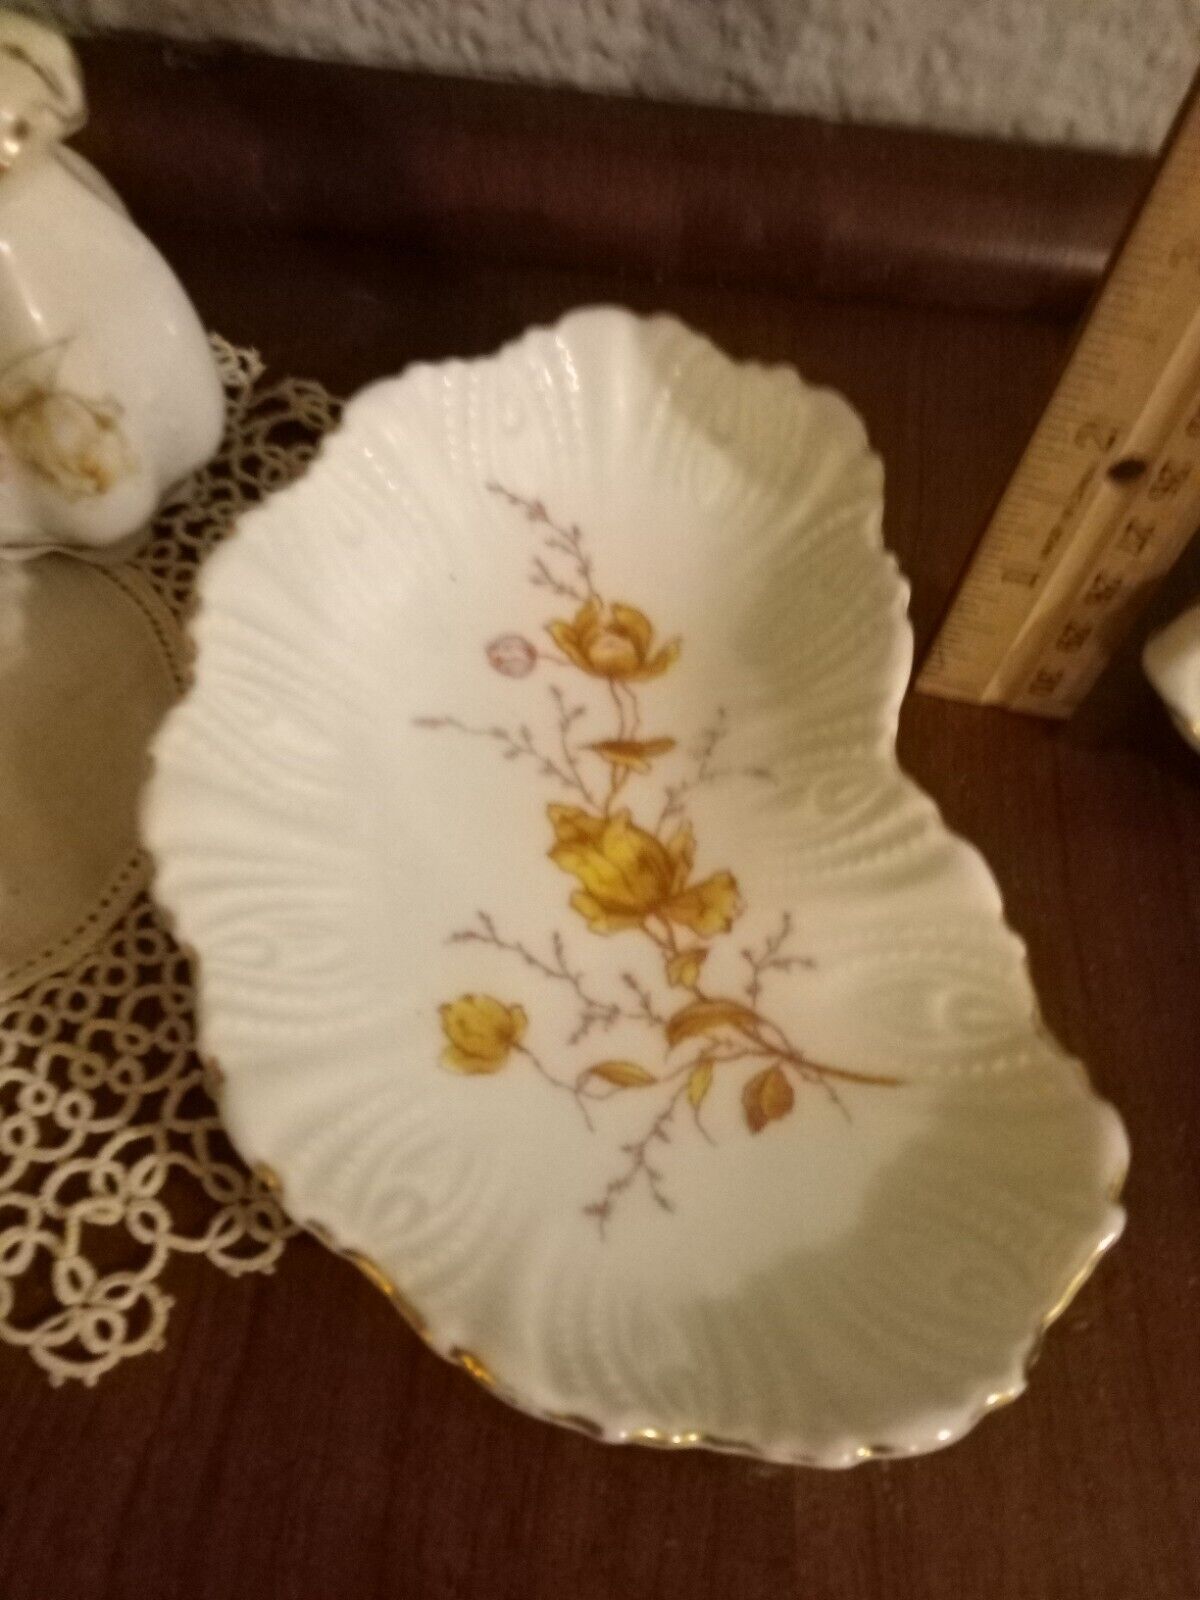 4 Antique porcelain bone dish plate Germany Carlsbad yellow roses dresden china